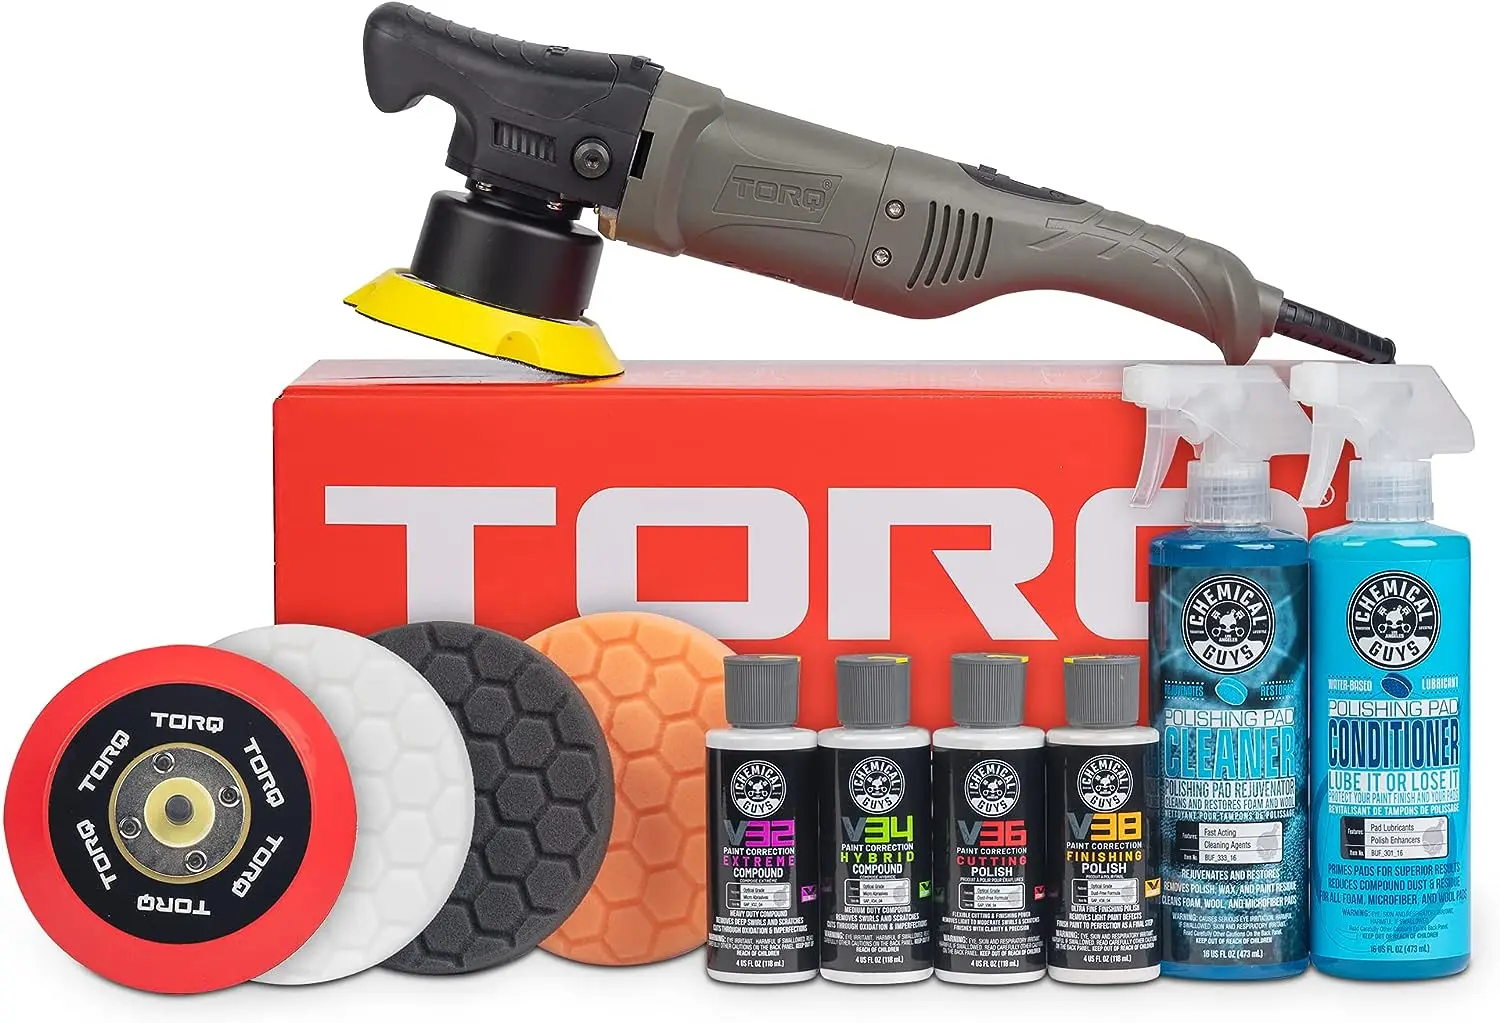 

TORQ 10FX Random Orbital Polisher Kit with Pads, Pad Cleaner & Conditioner, Polishes & Compounds (11 Items)